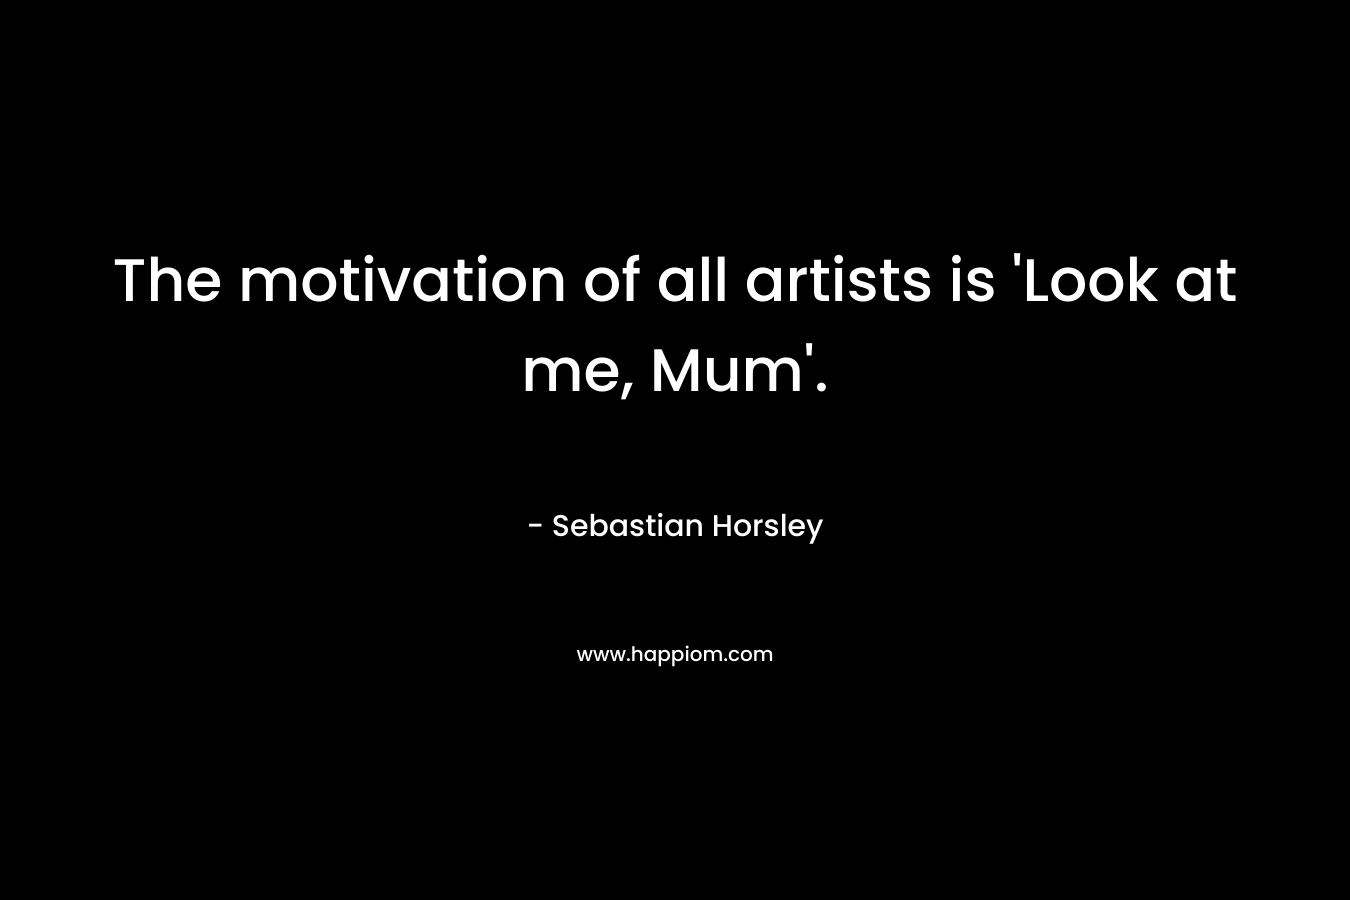 The motivation of all artists is ‘Look at me, Mum’. – Sebastian Horsley